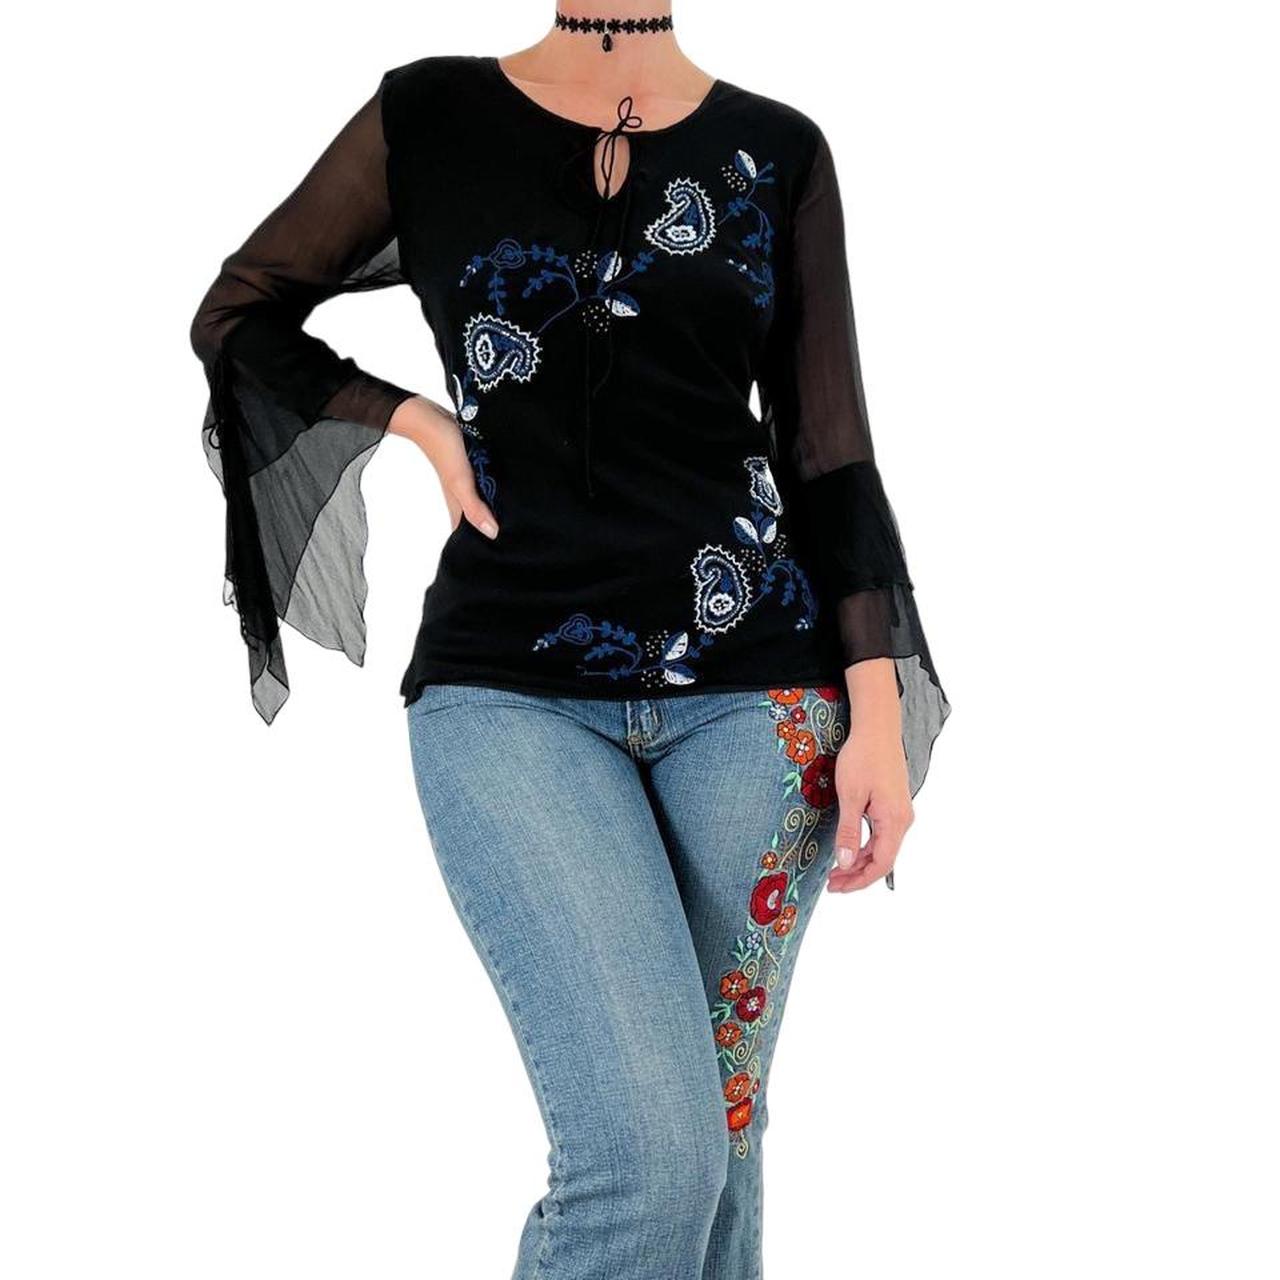 Y2k Vintage Black + Blue floral Embroidered Top w/ Sheer Butterfly Sleeves [S]